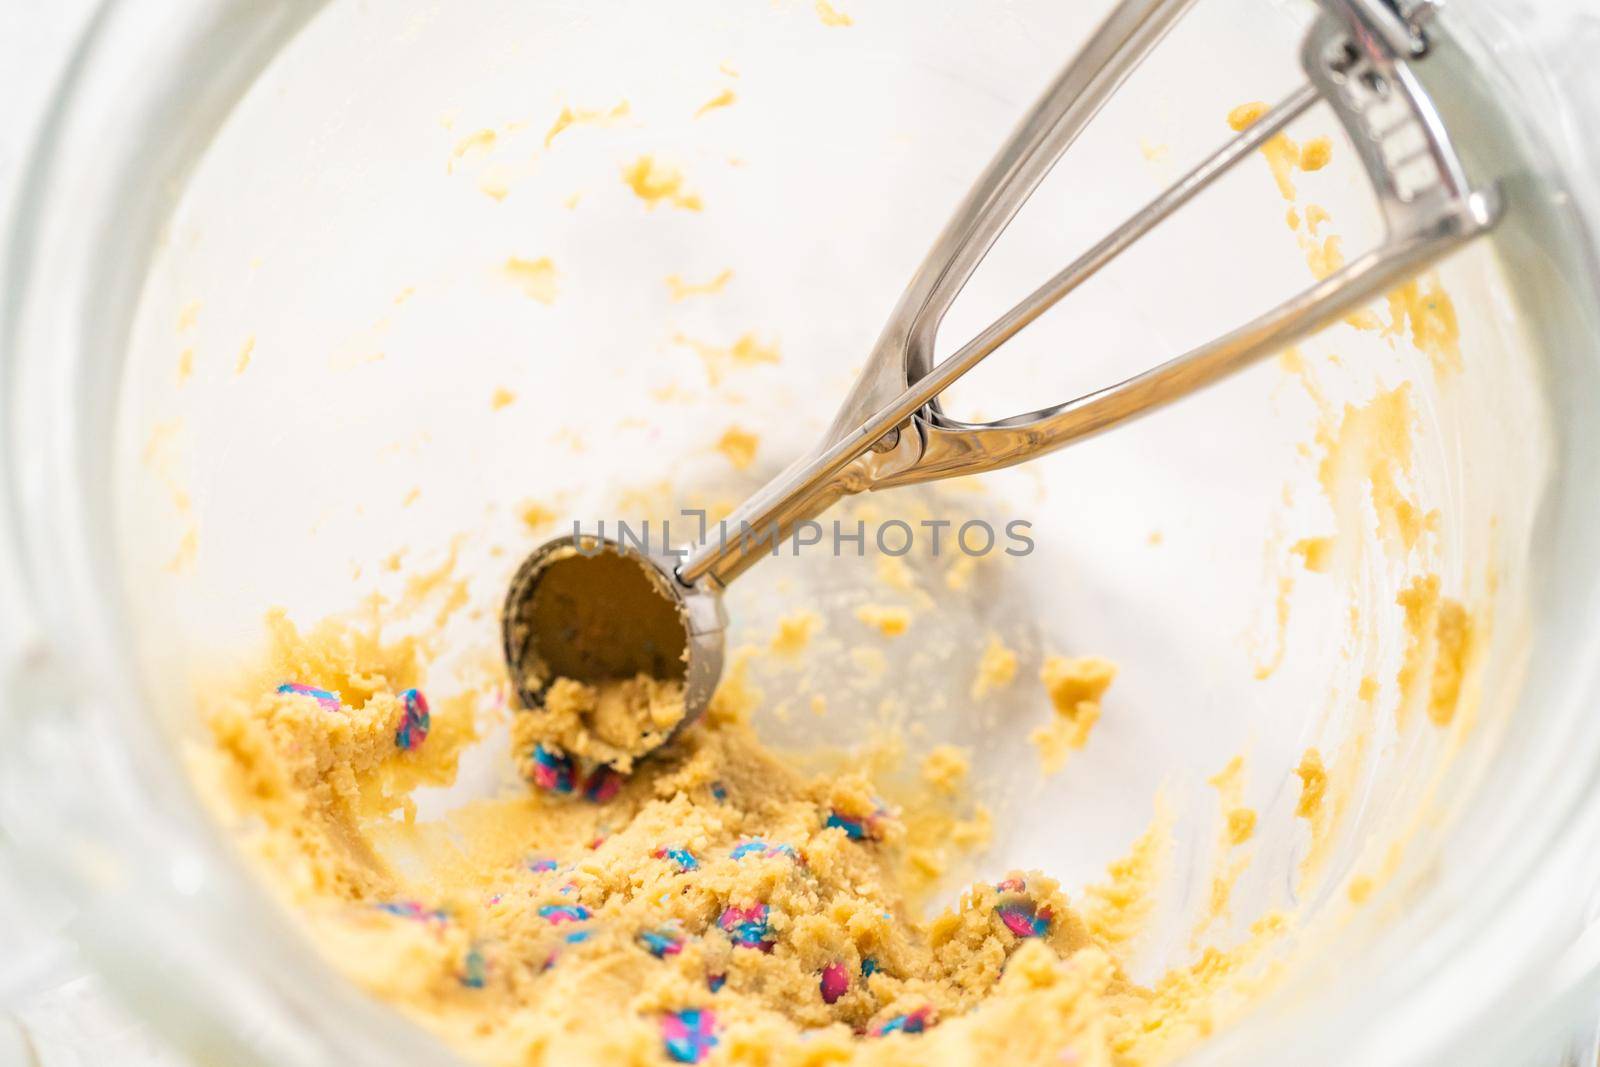 Scooping cookie dough with a dough scoop to bake unicorn chocolate chip cookies.